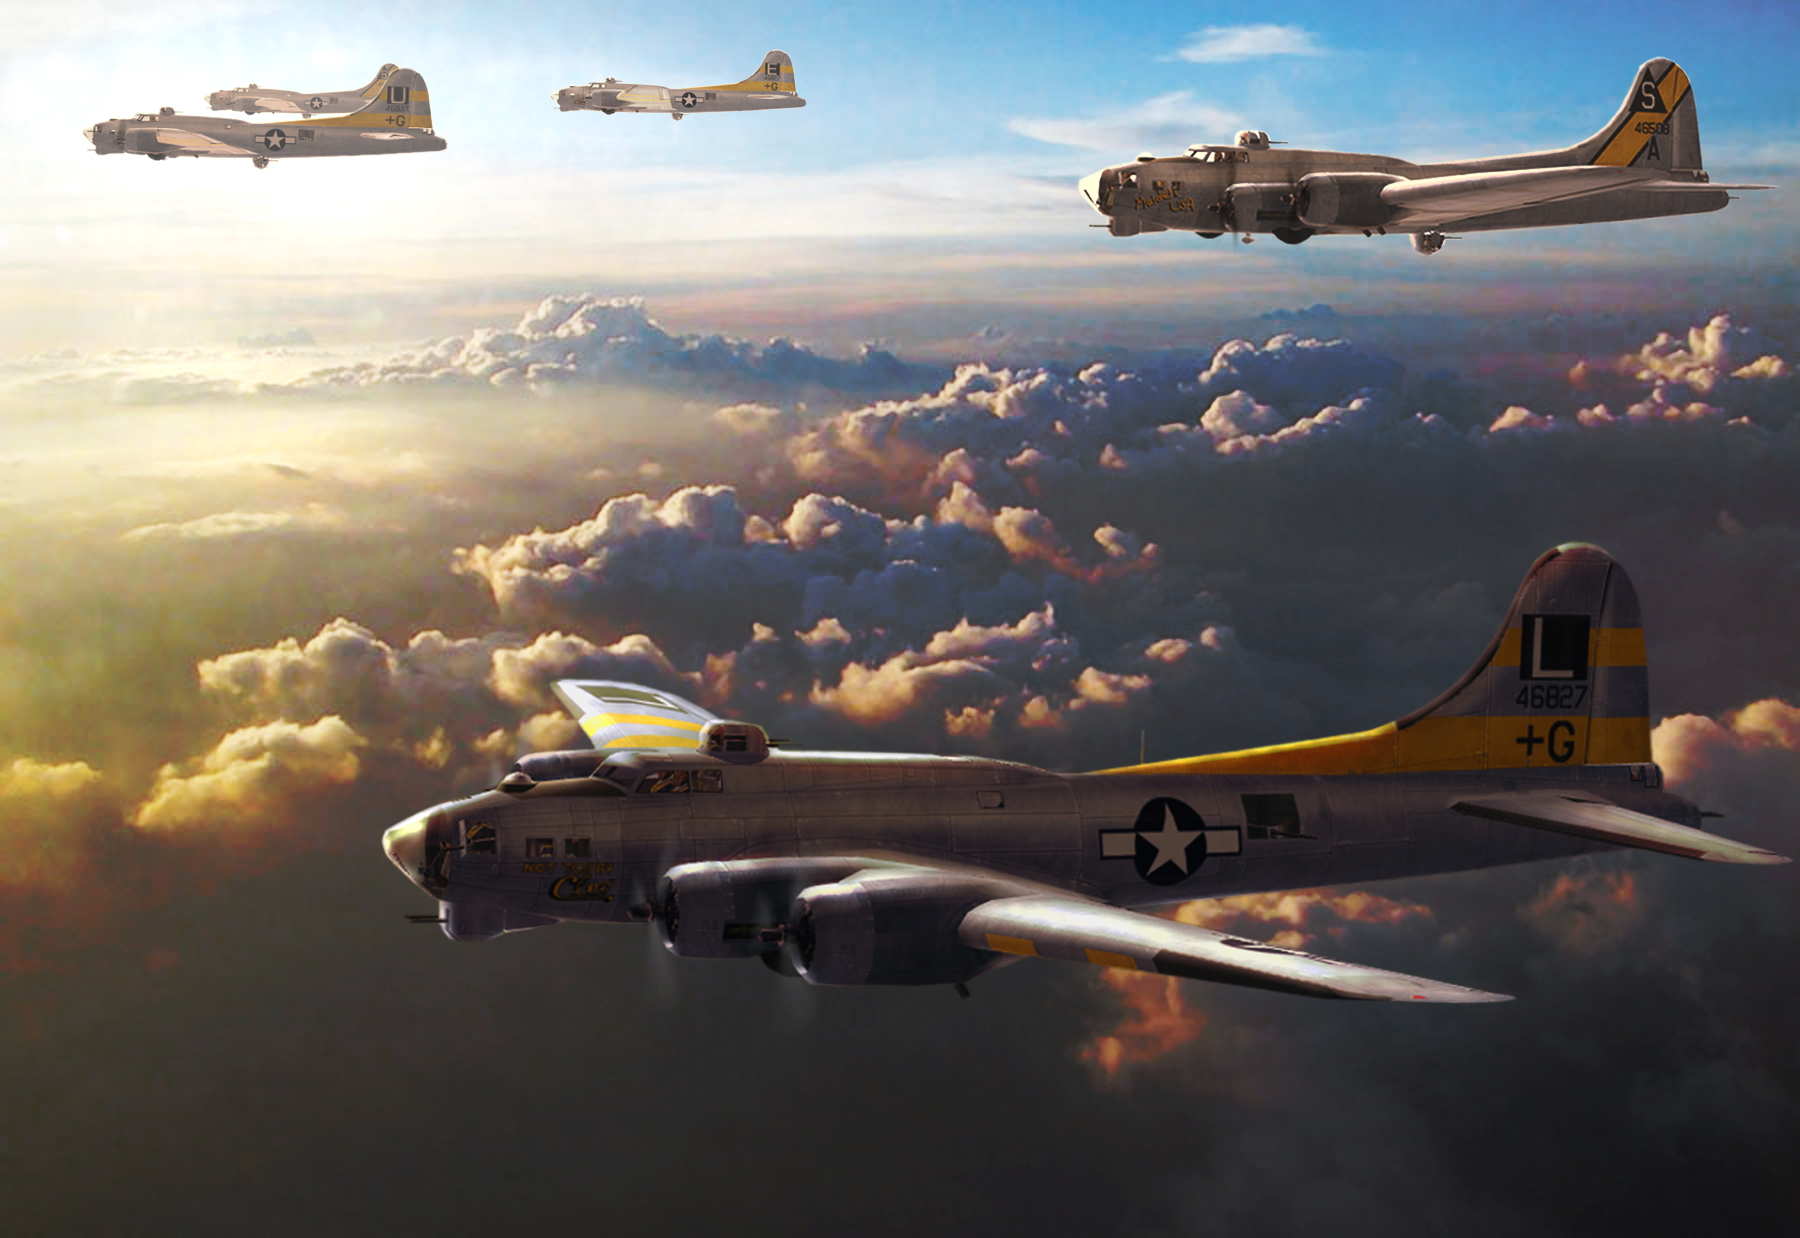 Photos Of Special Interest For The Development Team - Air Force Wallpaper Ww2 , HD Wallpaper & Backgrounds